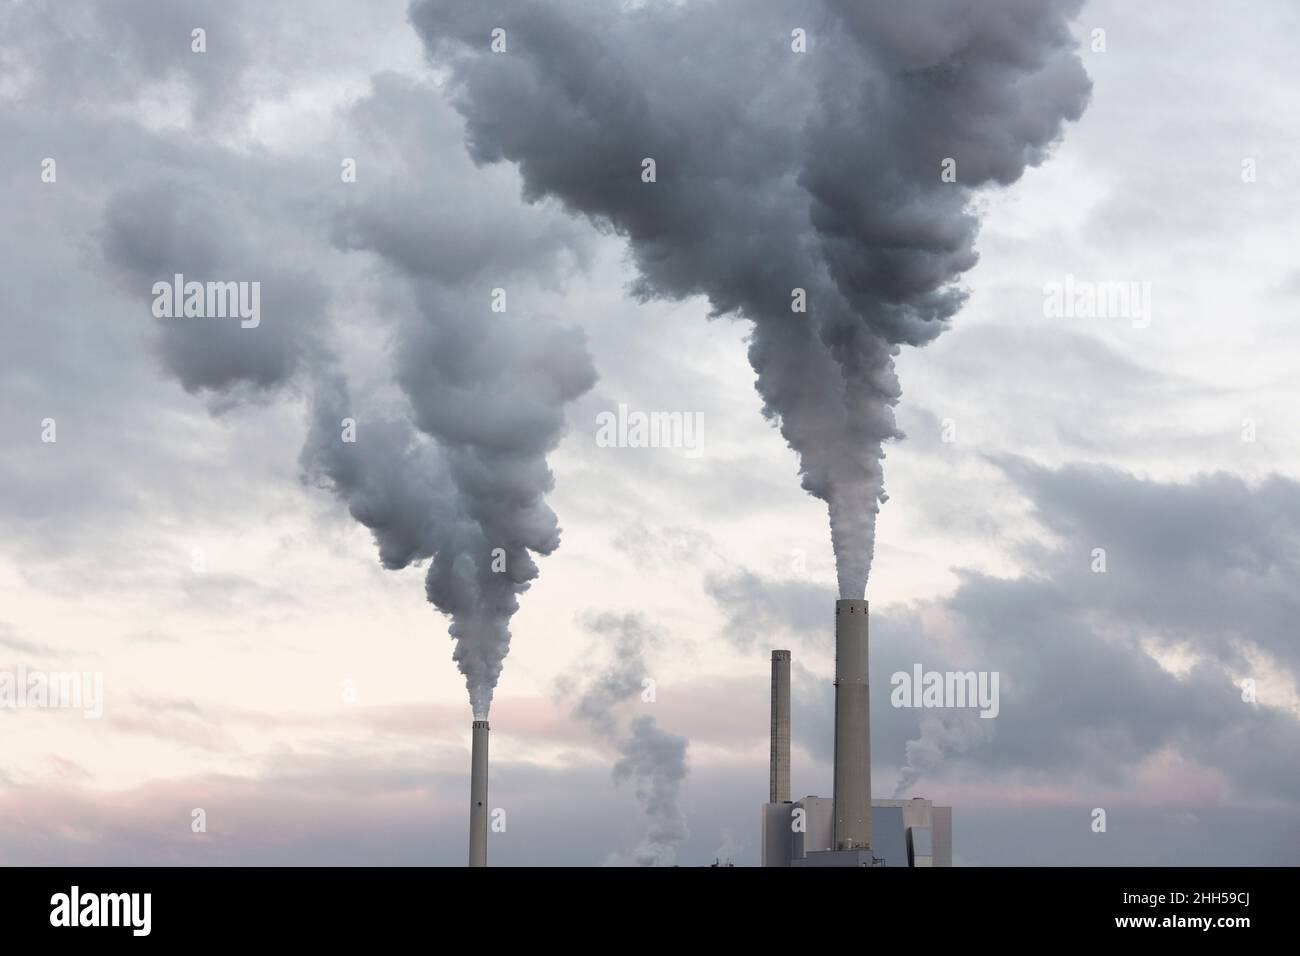 Chimneys of a coal power station causing global warming Stock Photo